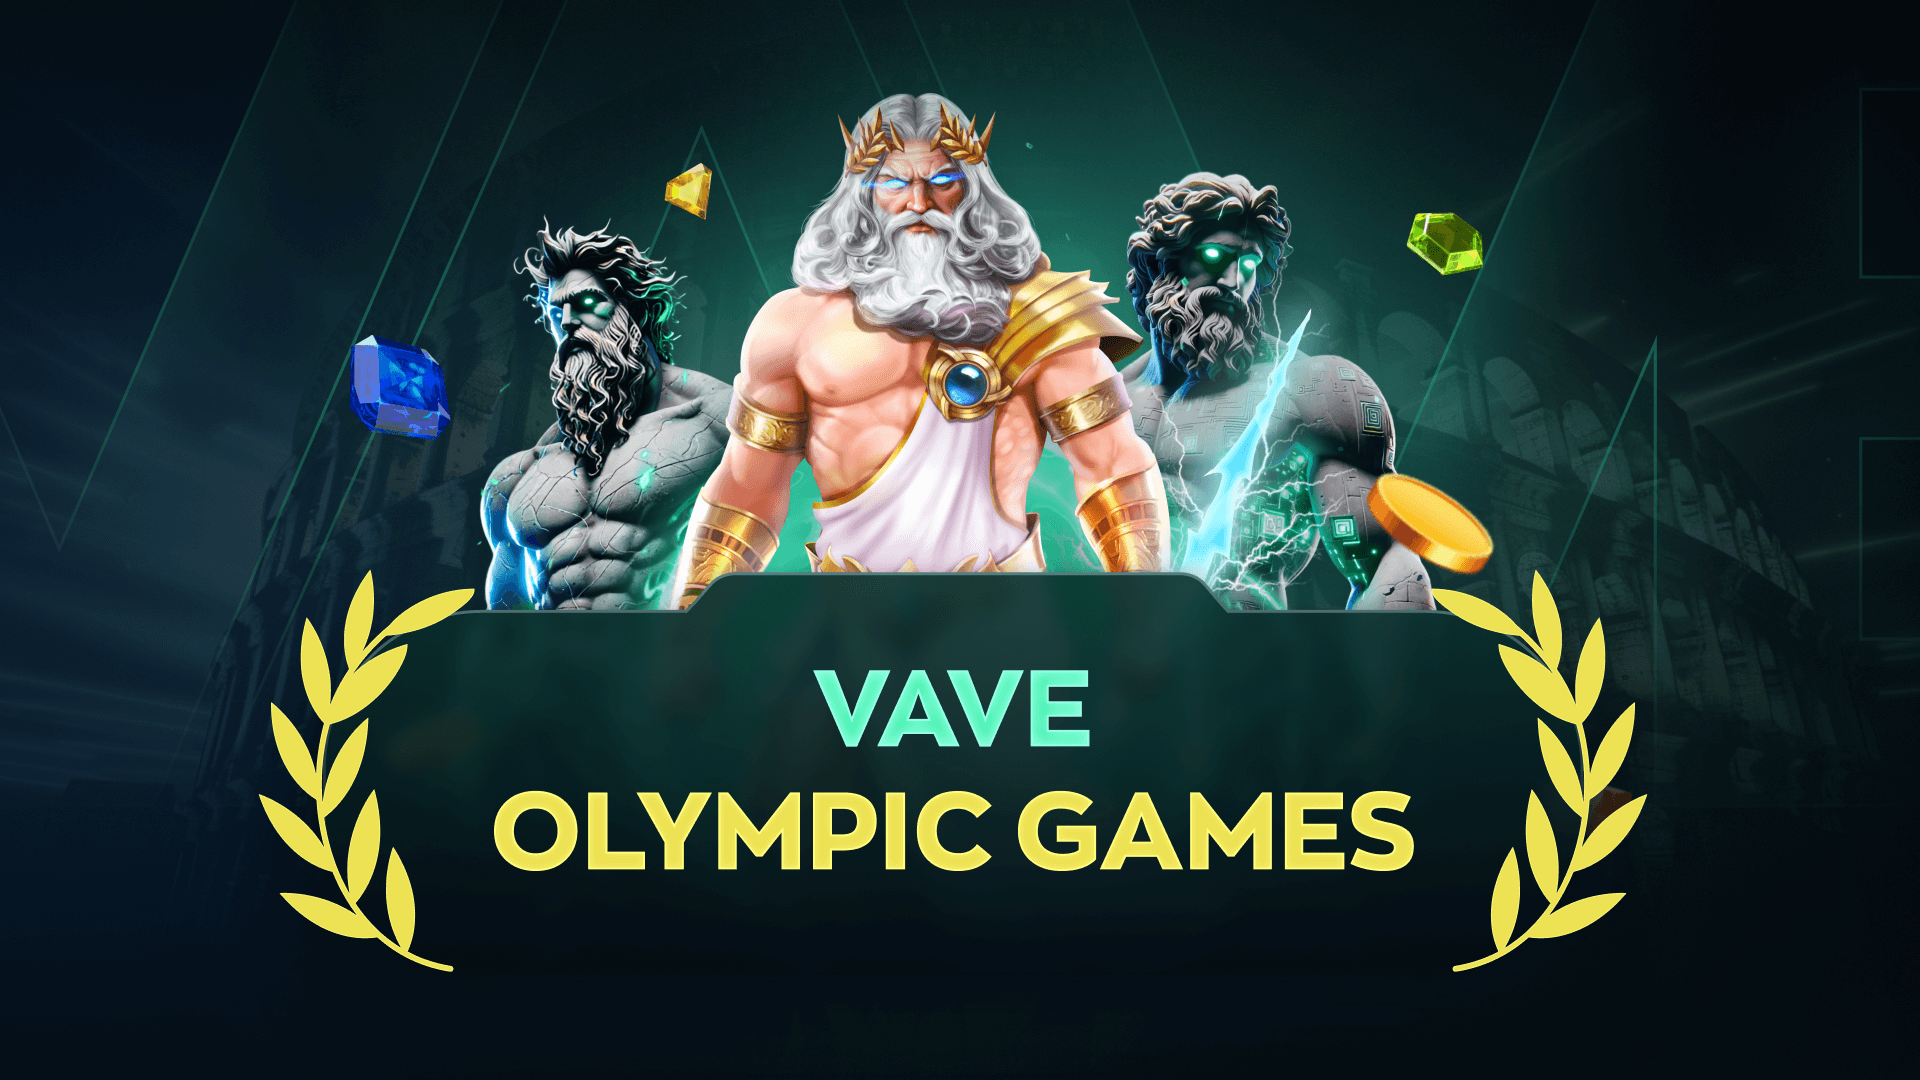 Meet the Vave Olympic Games